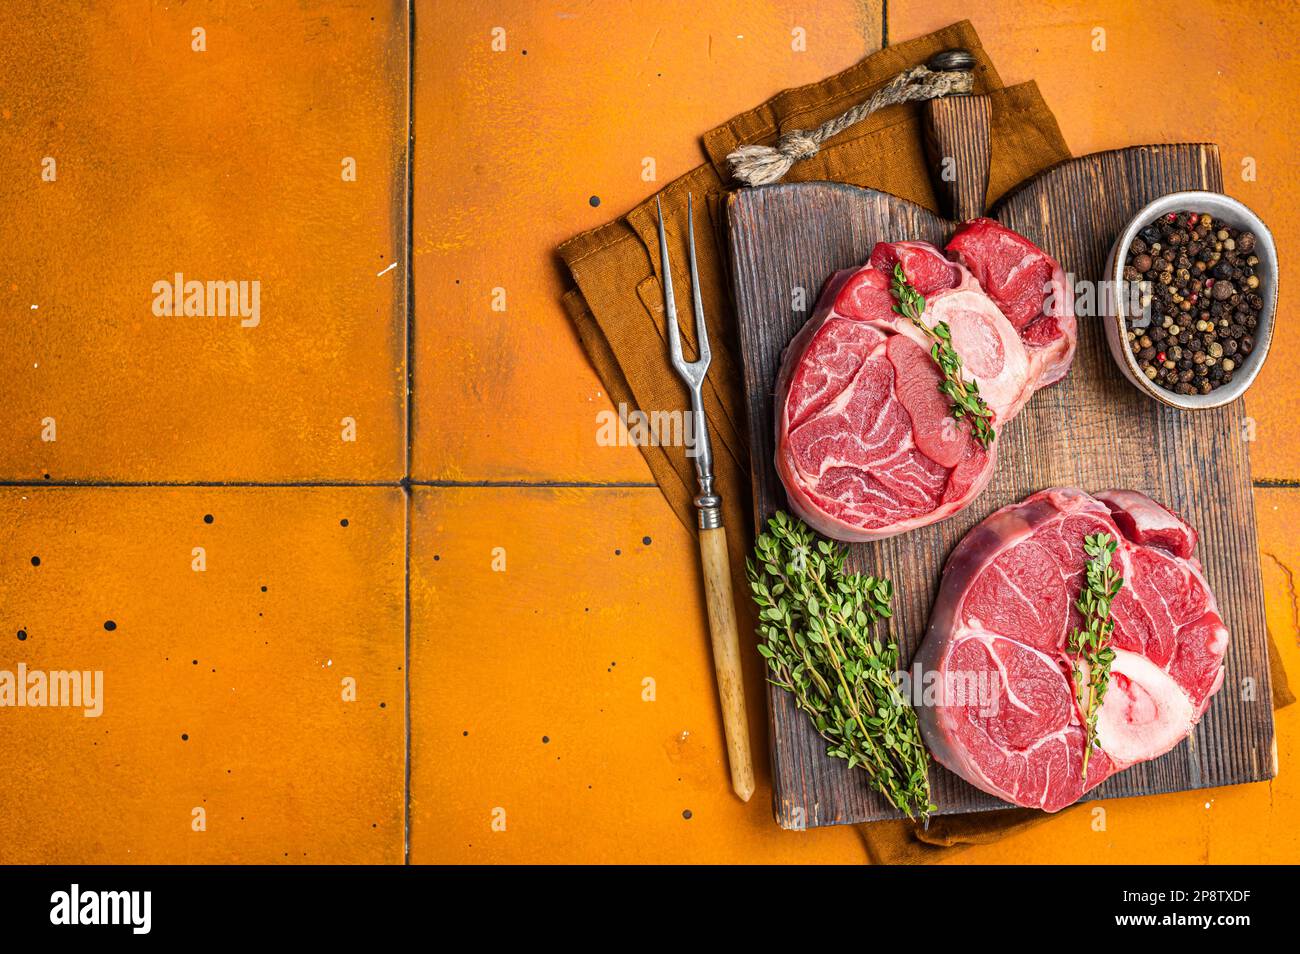 Osso buco Veal shank, raw cross cut veal shank, Italian Ossobuco. Orange background. Top view. Copy space. Stock Photo